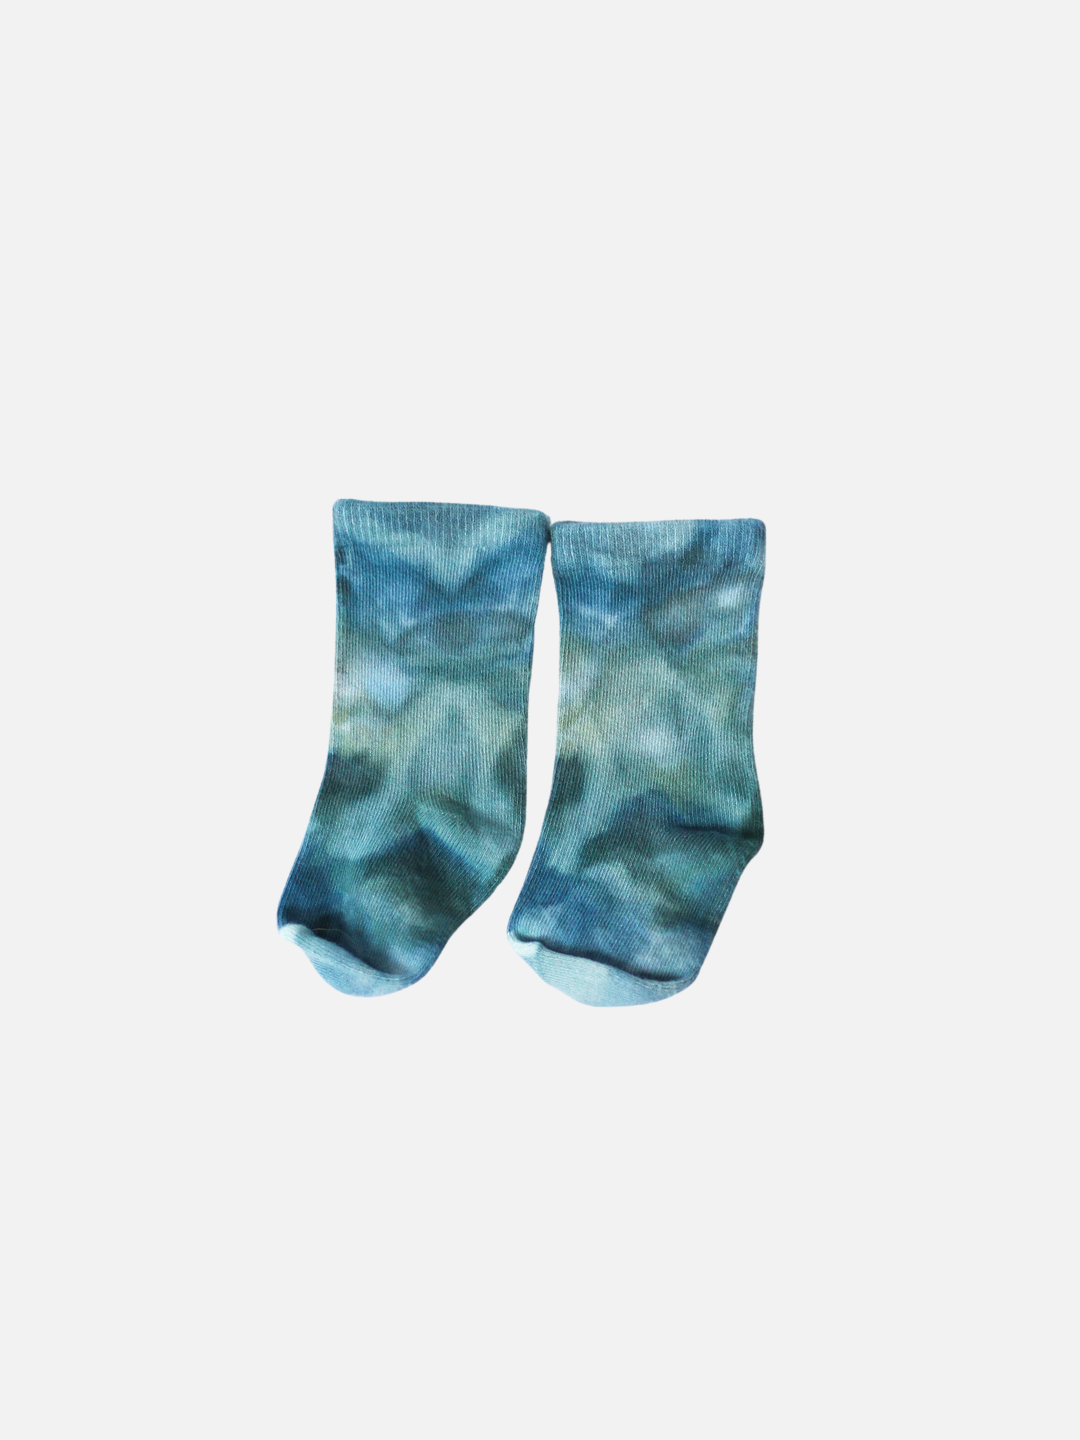 Blue Lagoon | Pair of baby ankle socks in dappled shades of blue and green